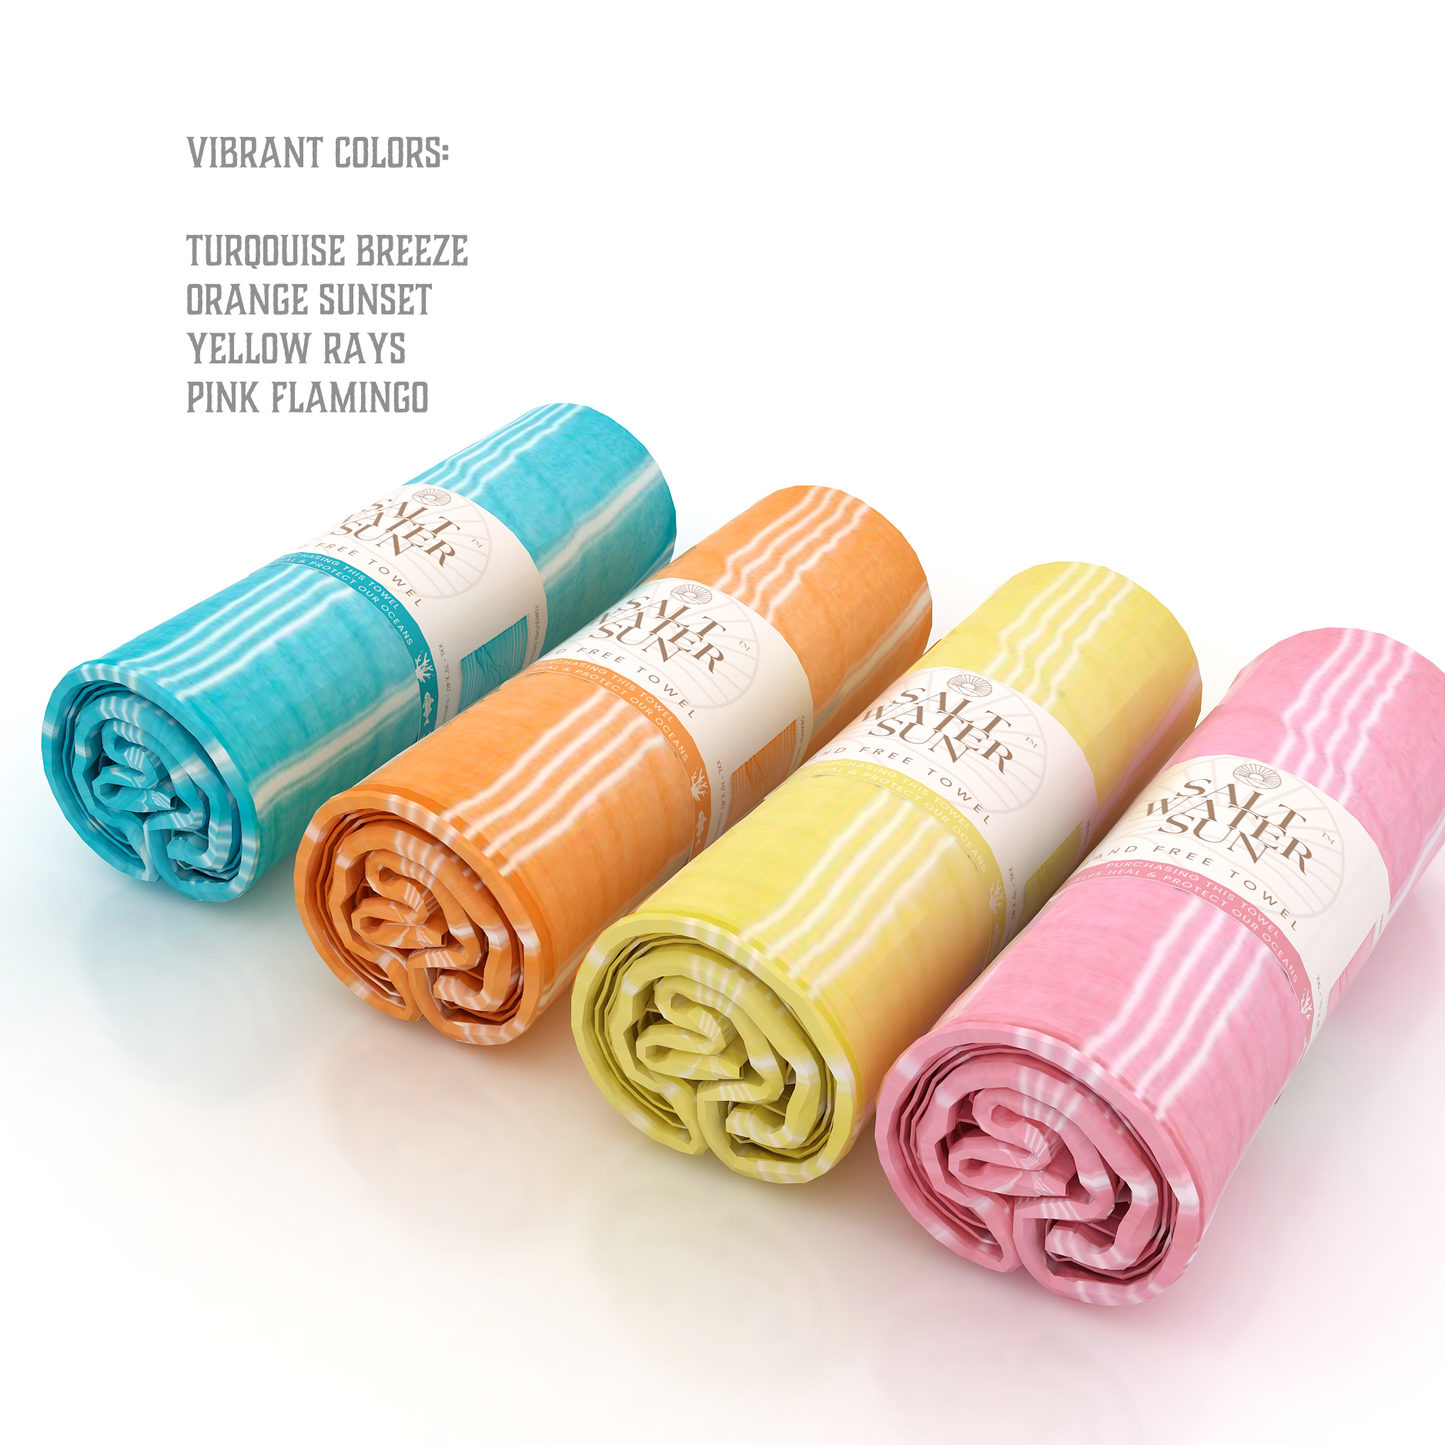 Salt Water Sun - "Grab and Go" Rolled Turkish Towels - 48 Units + Retail Store Display RT789 & RT790